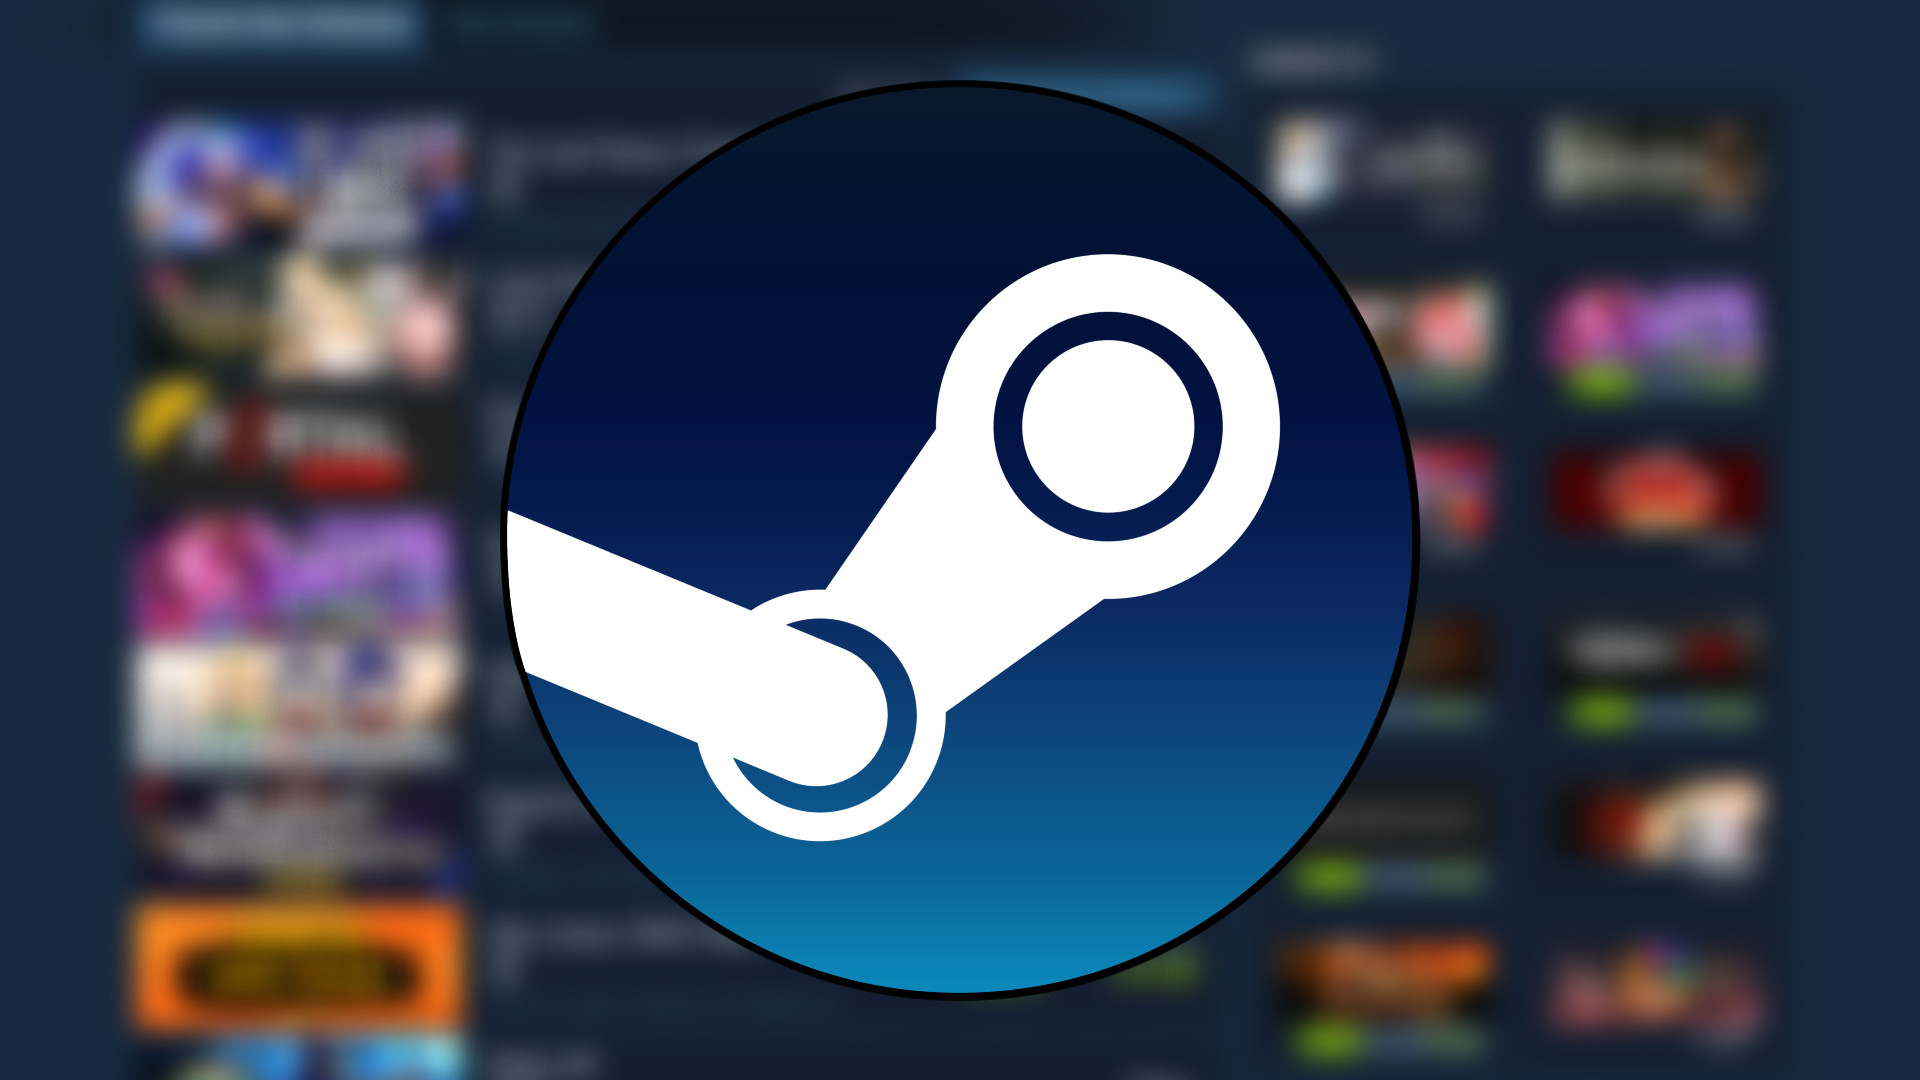 Steam wants you to report 